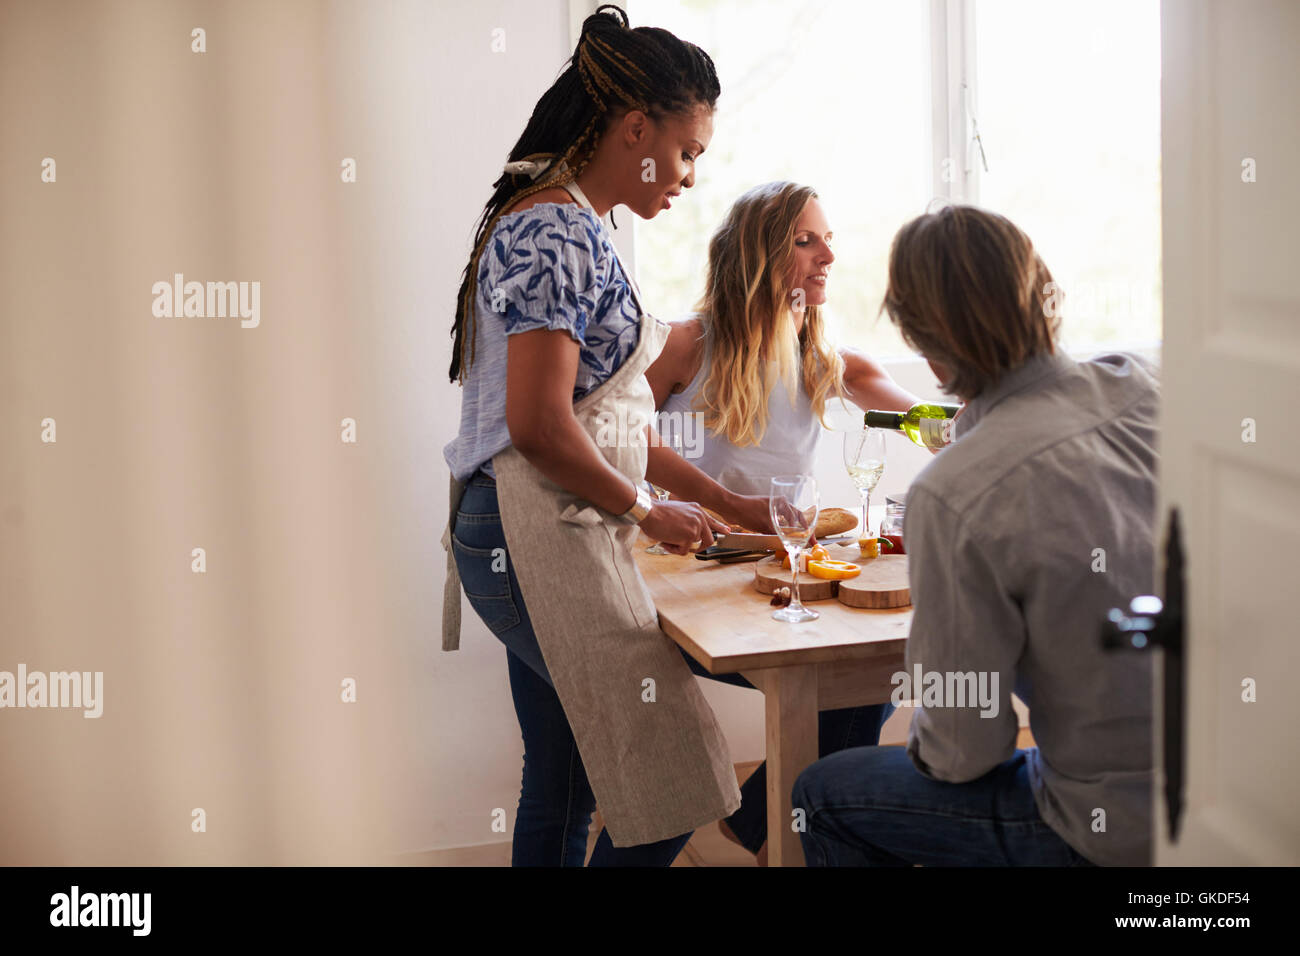 Woman prepares food and friends pour wine, view from doorway Stock Photo